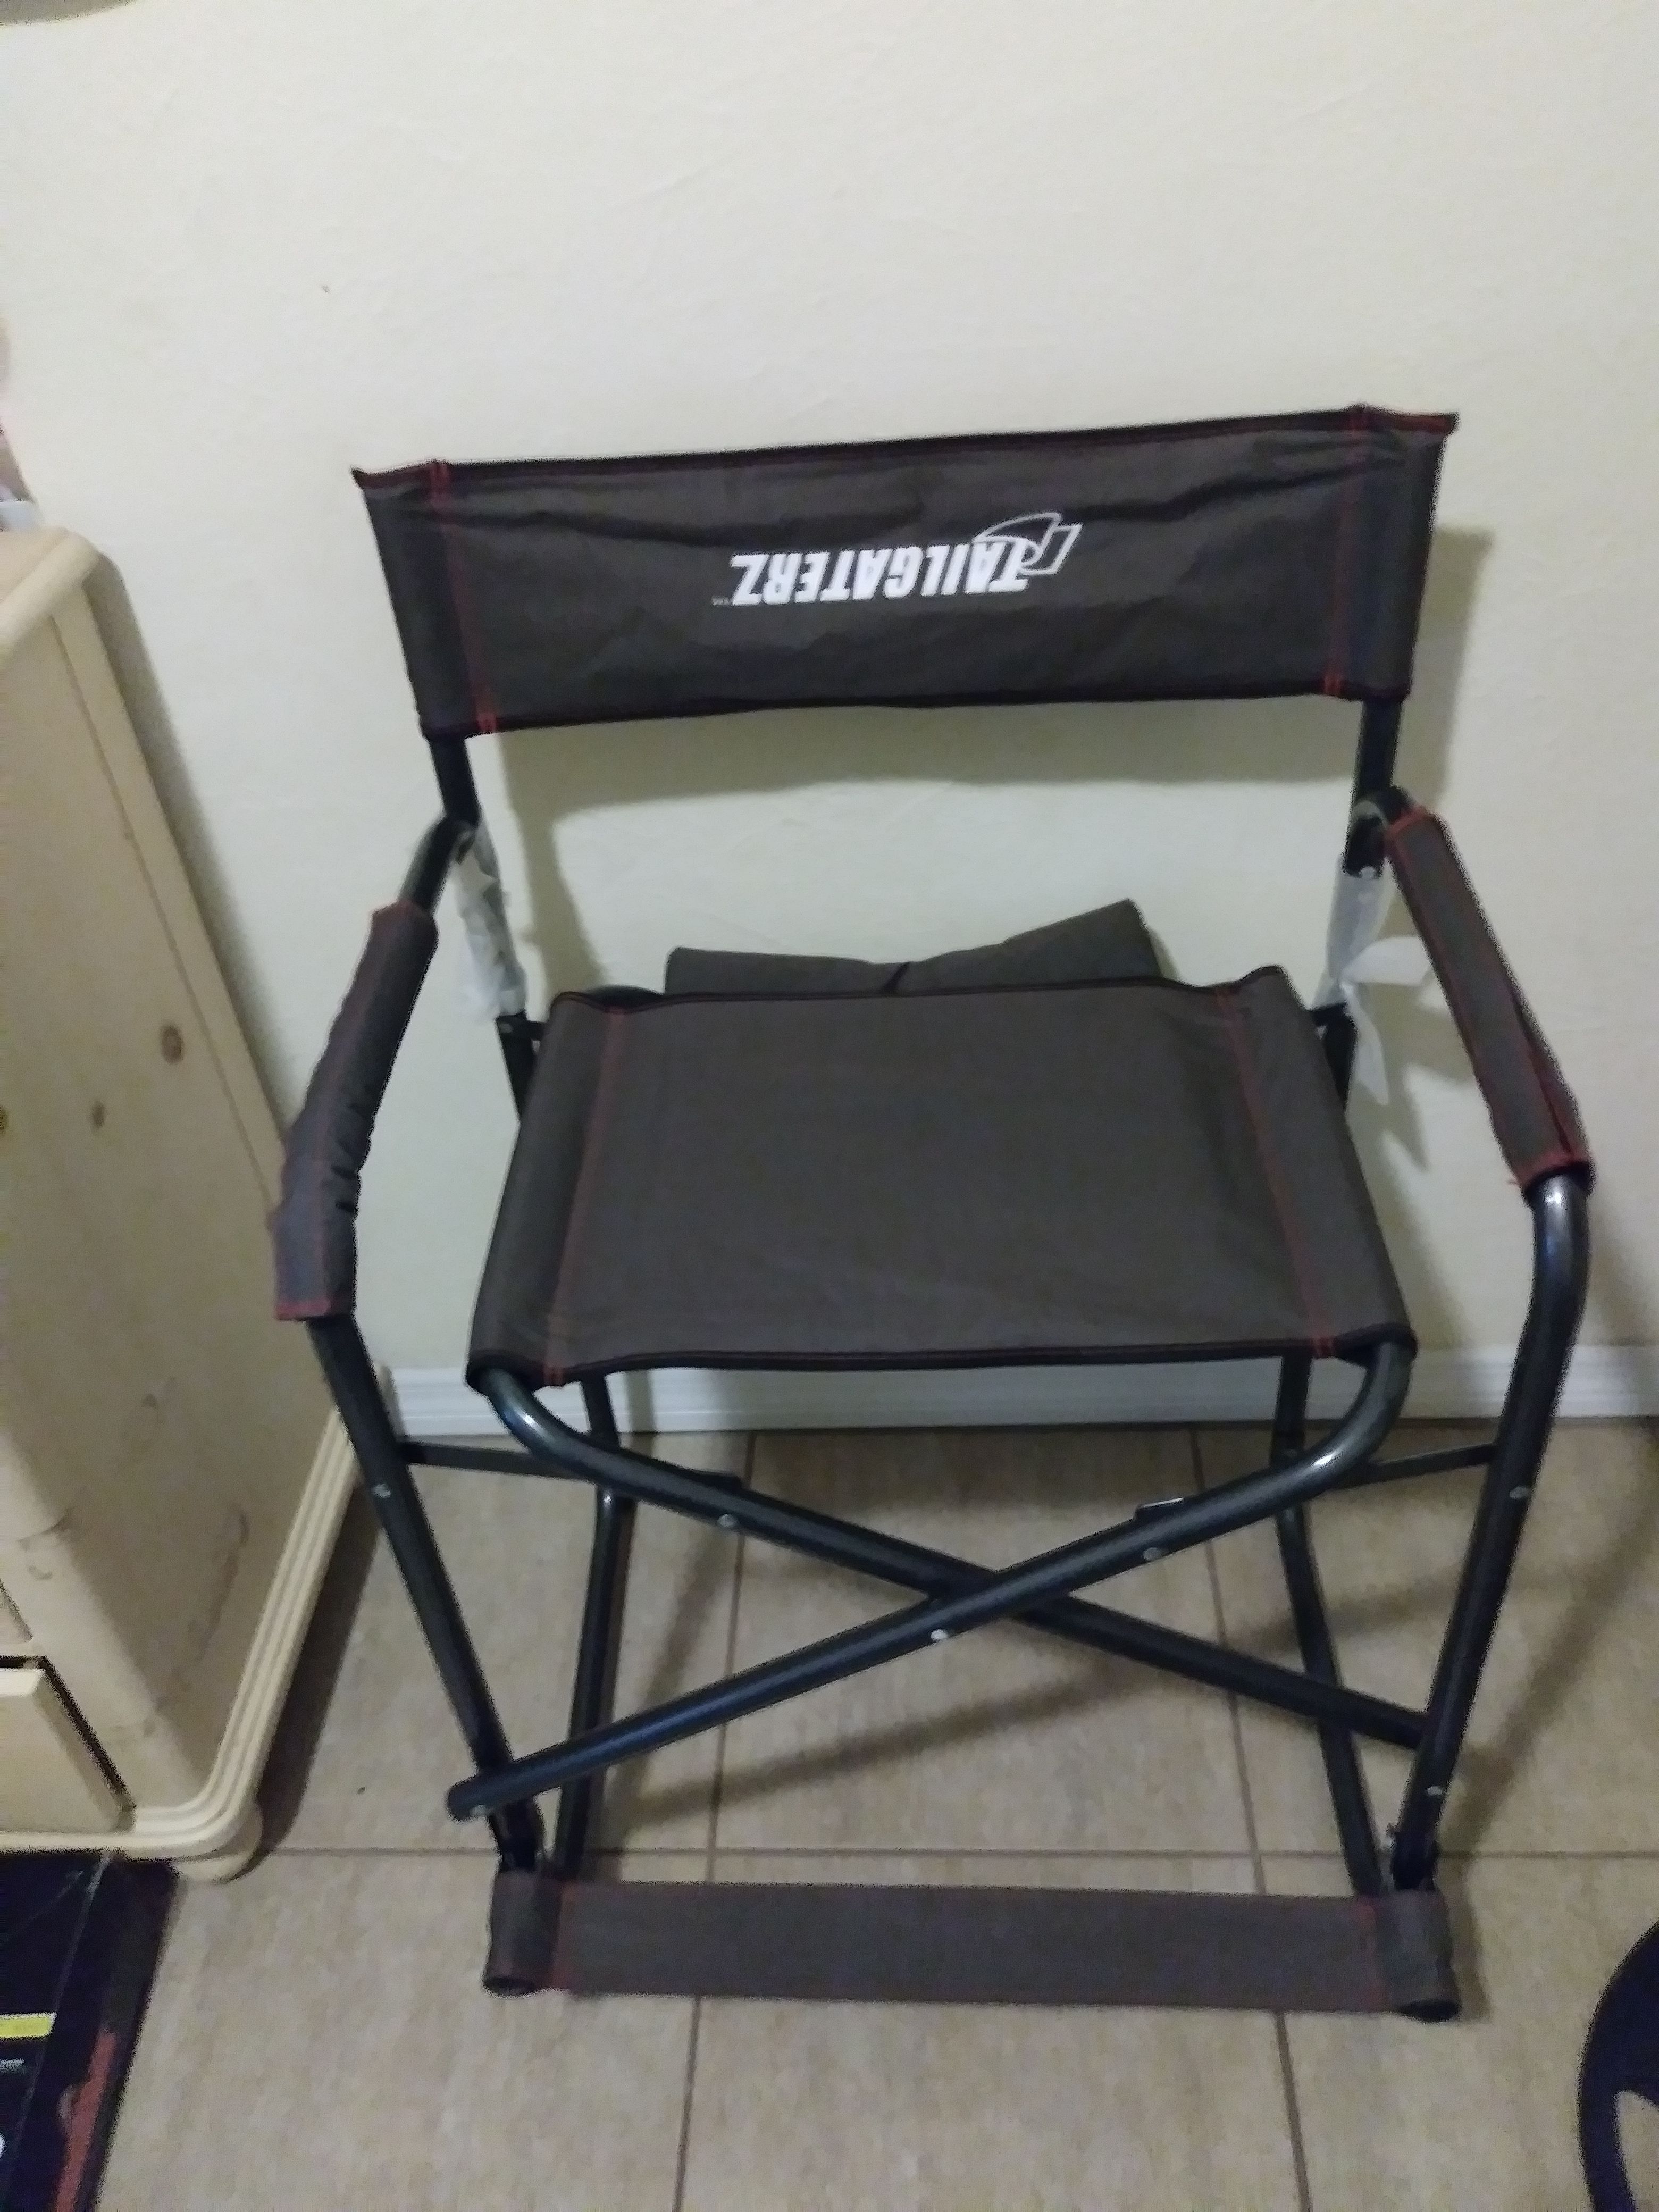 Folding chair with cushion made by Tailgaterz